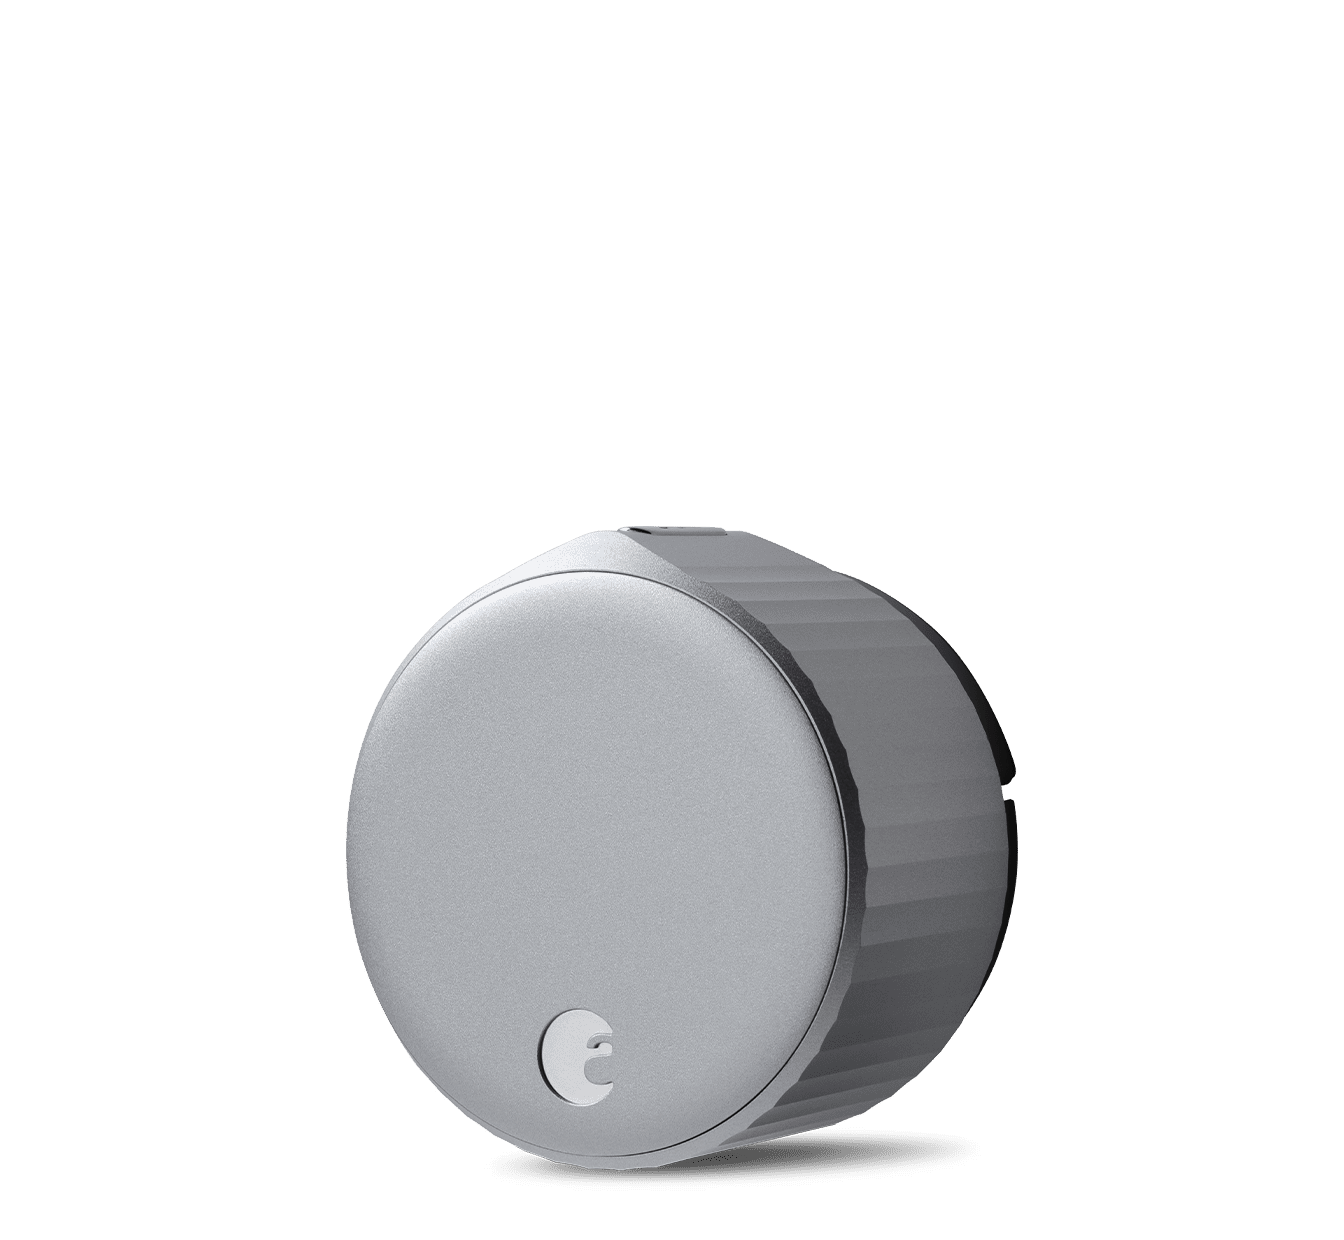 Best Smart Locks for Home Security on a Budget